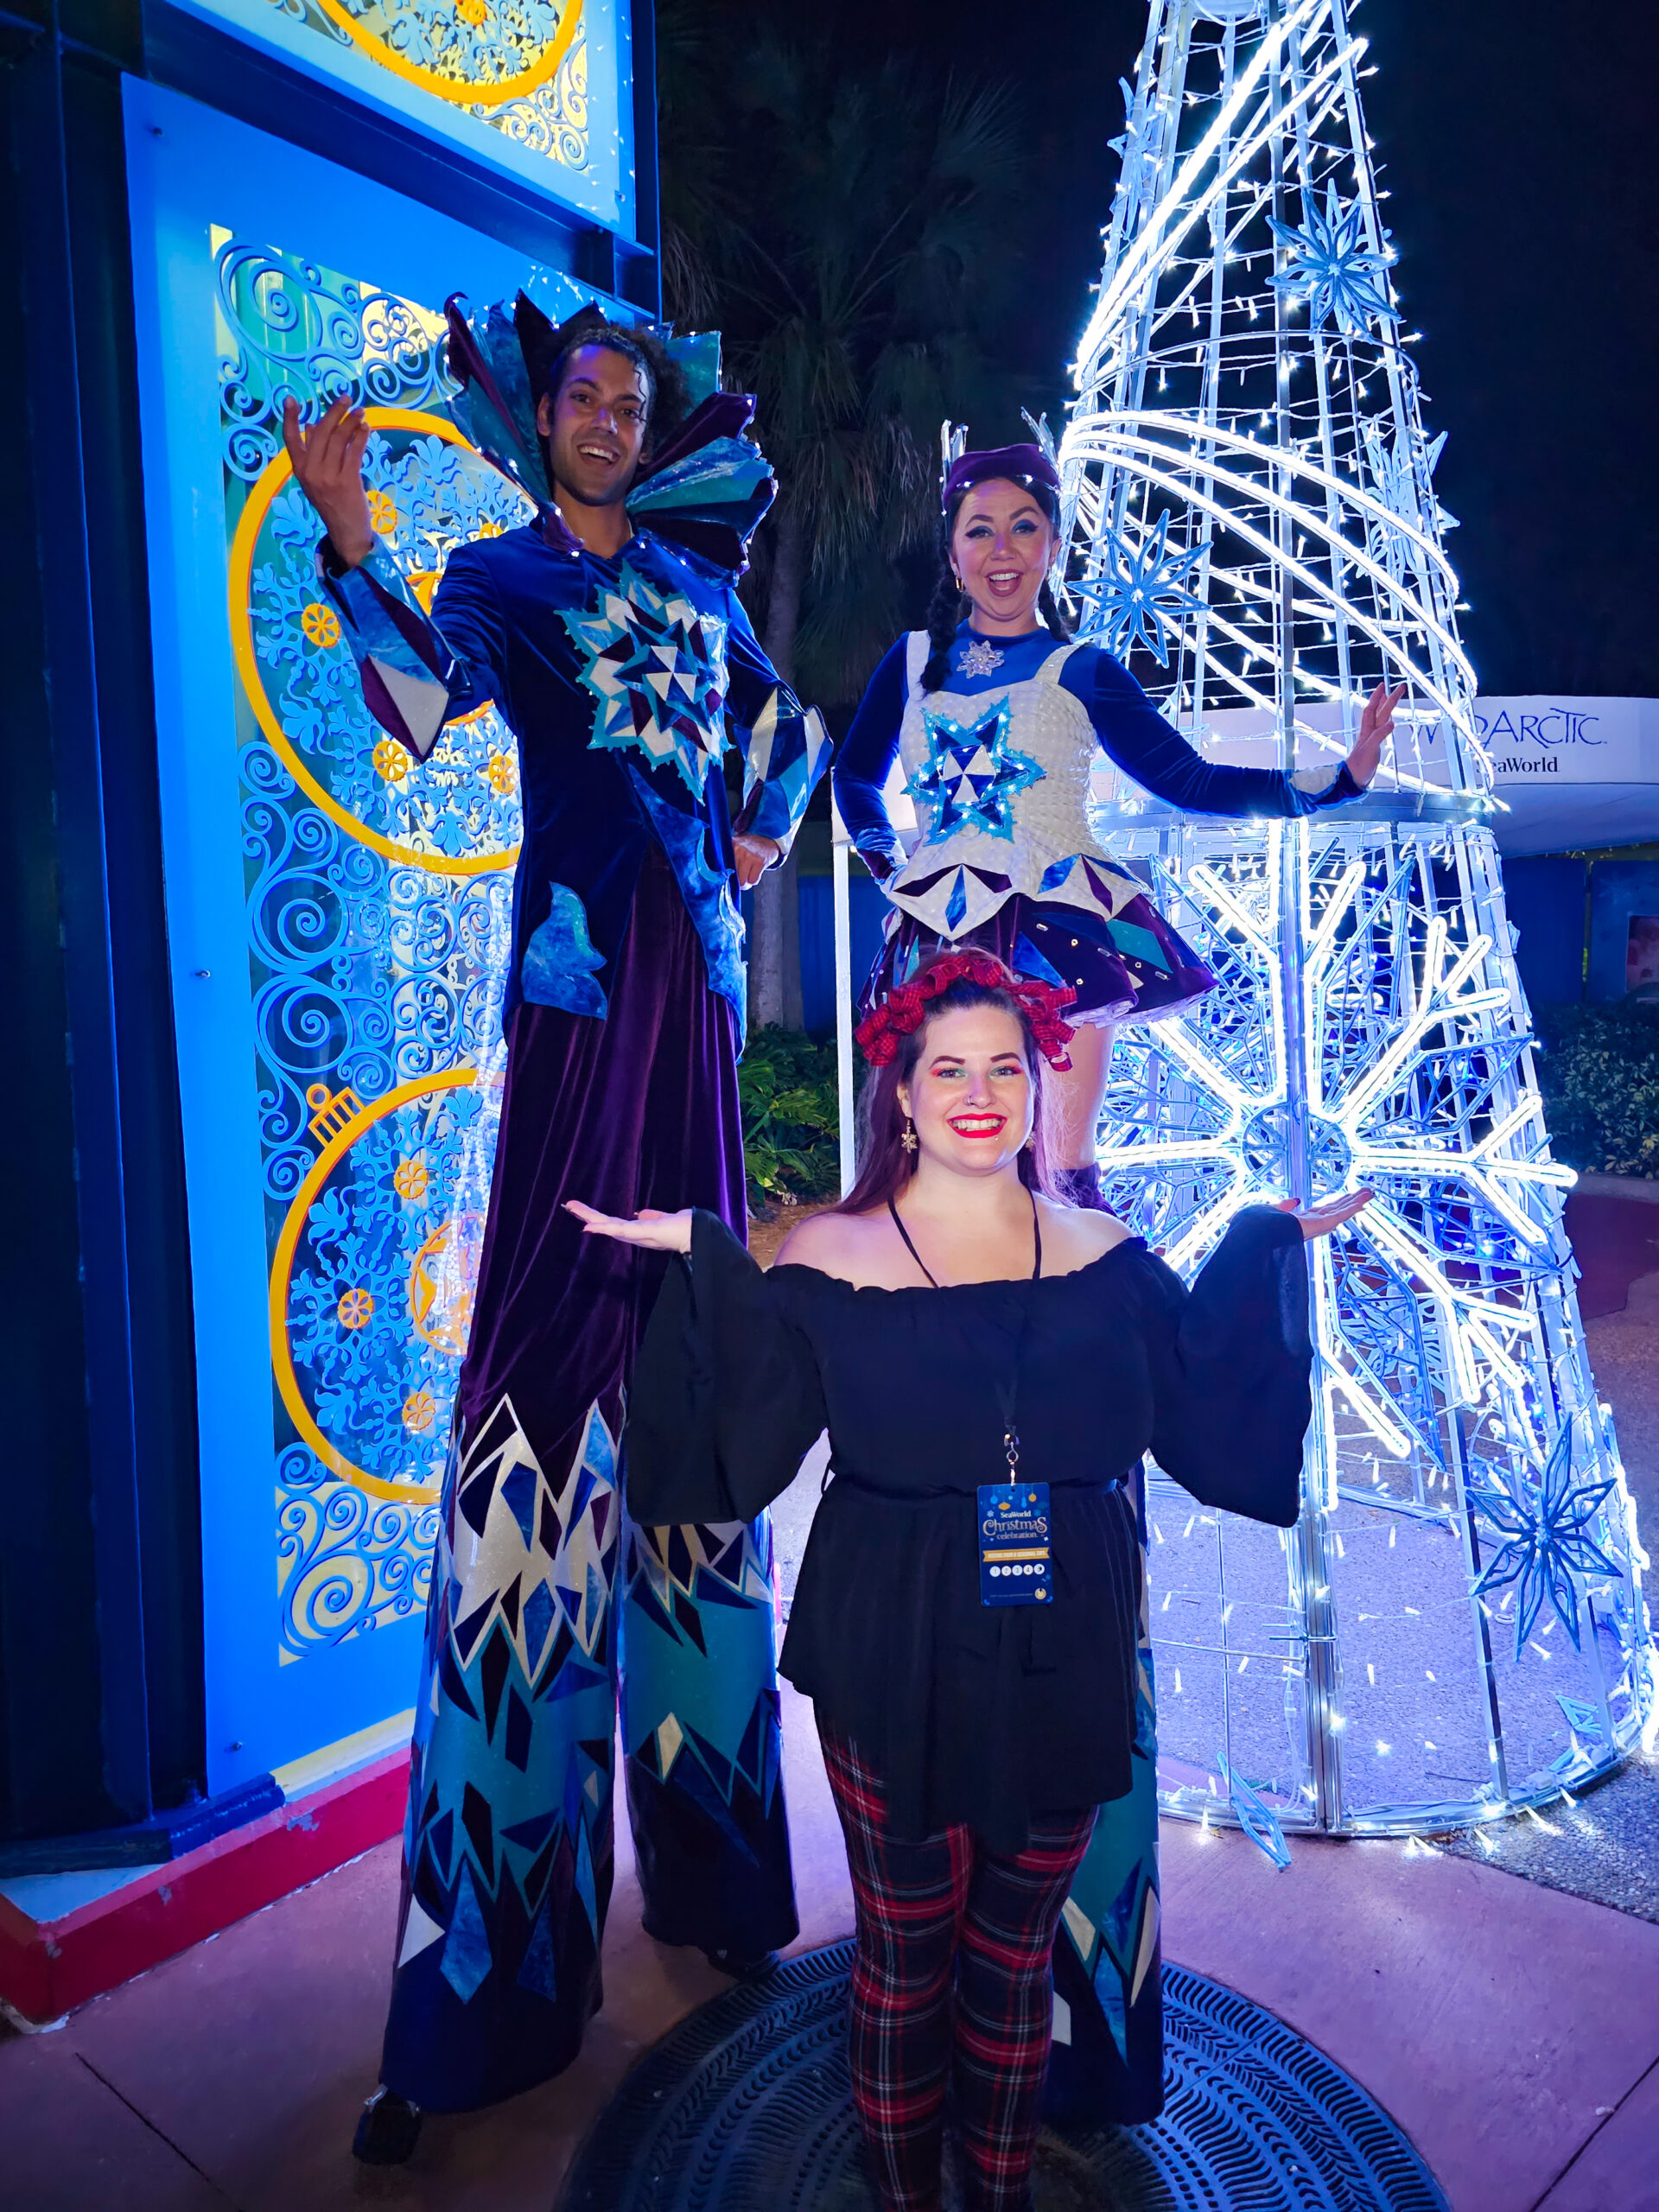 Kristin standing in front of two SeaWorld Employees on stilts wearing holiday gear.